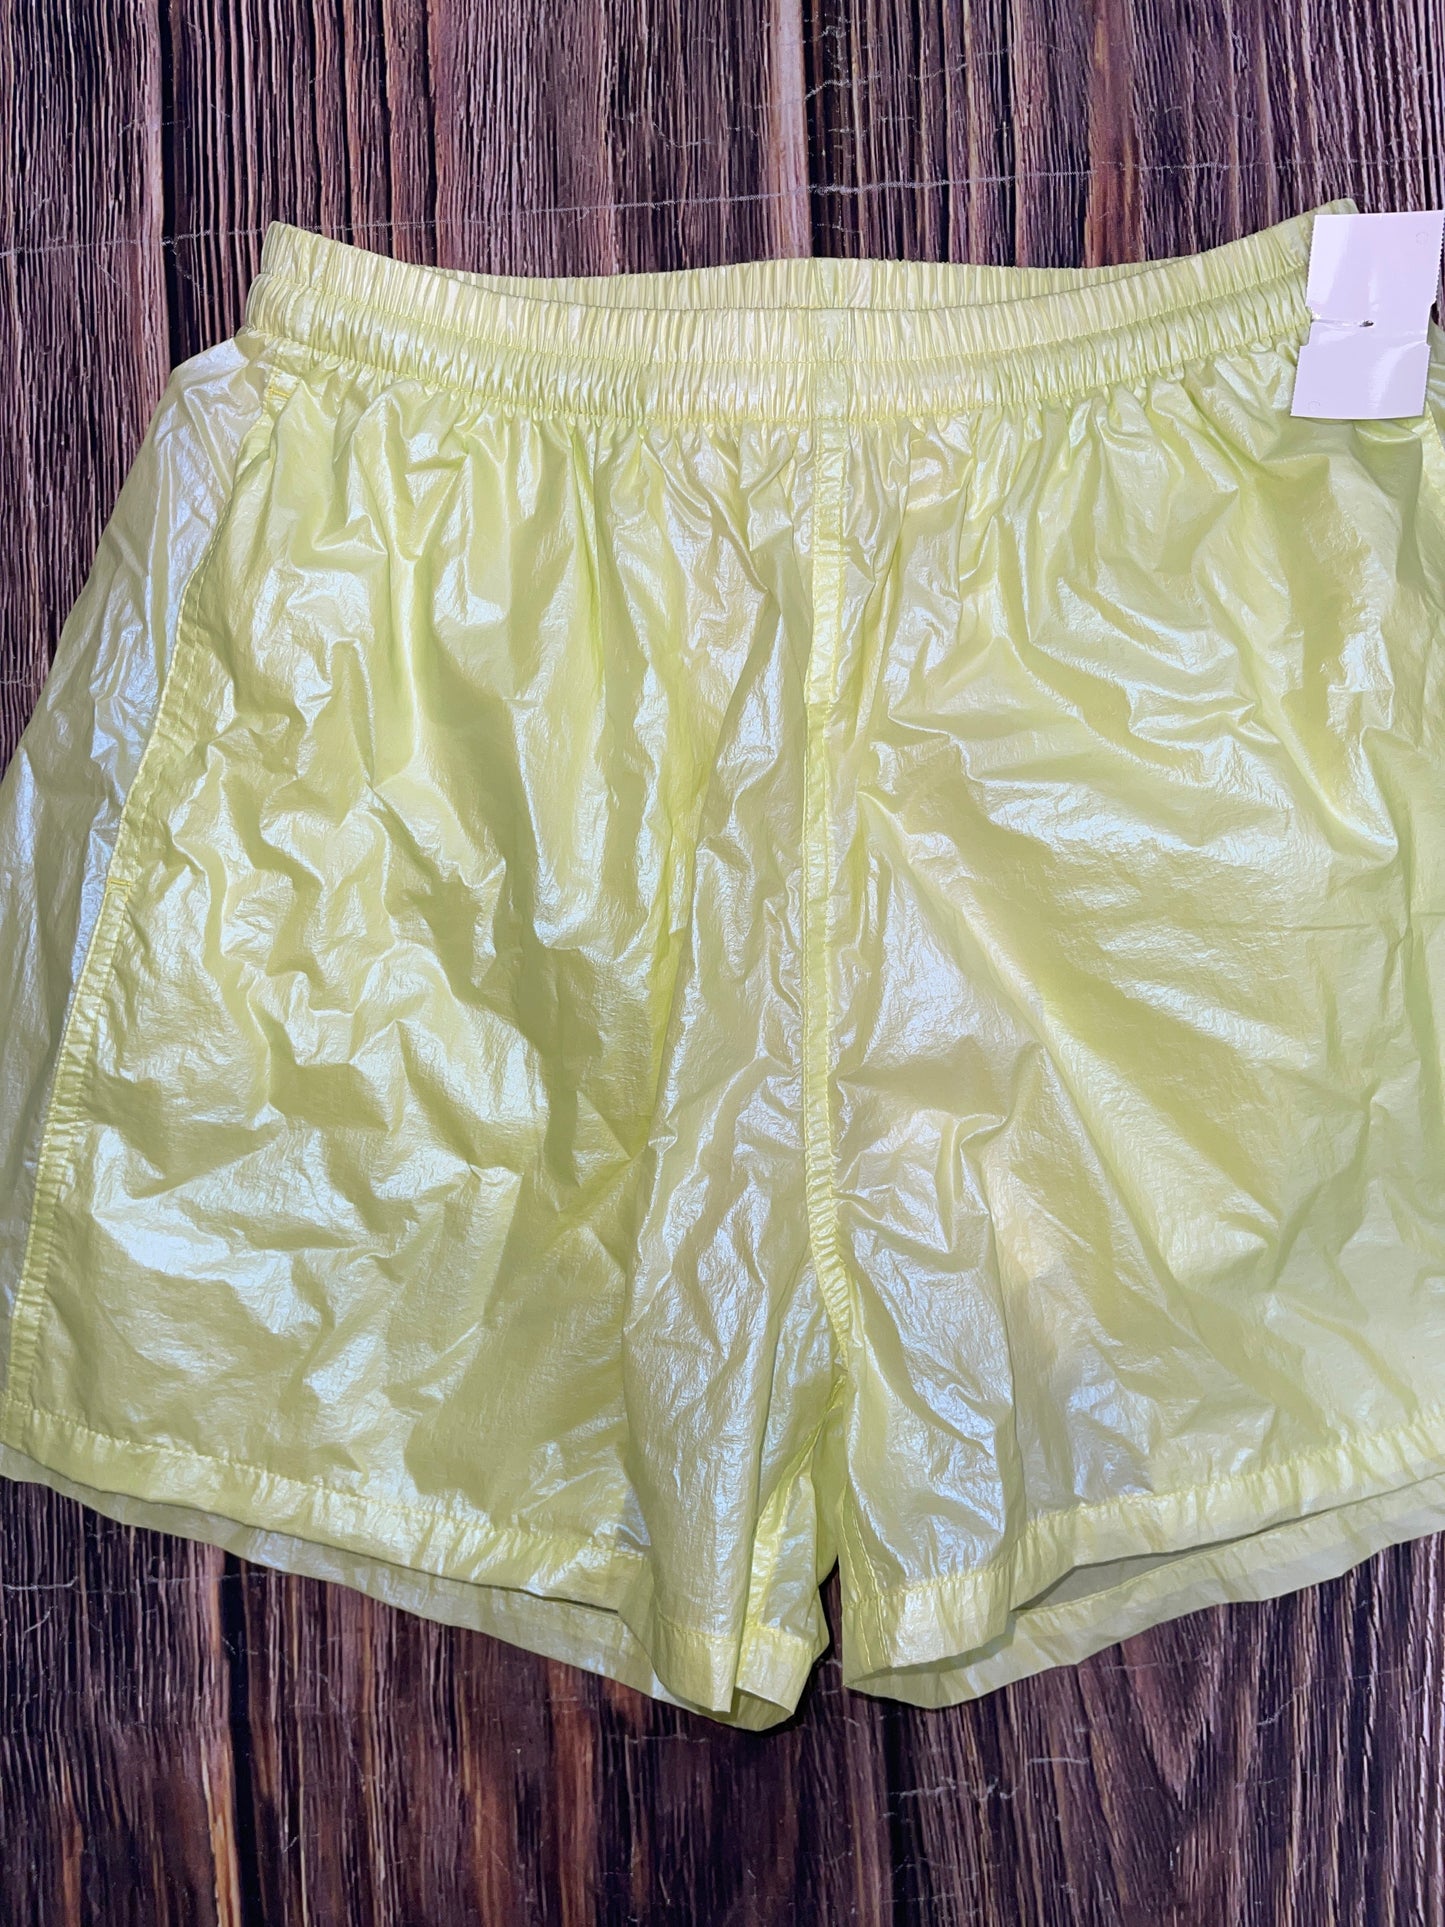 Green Athletic Shorts Tory Burch, Size S